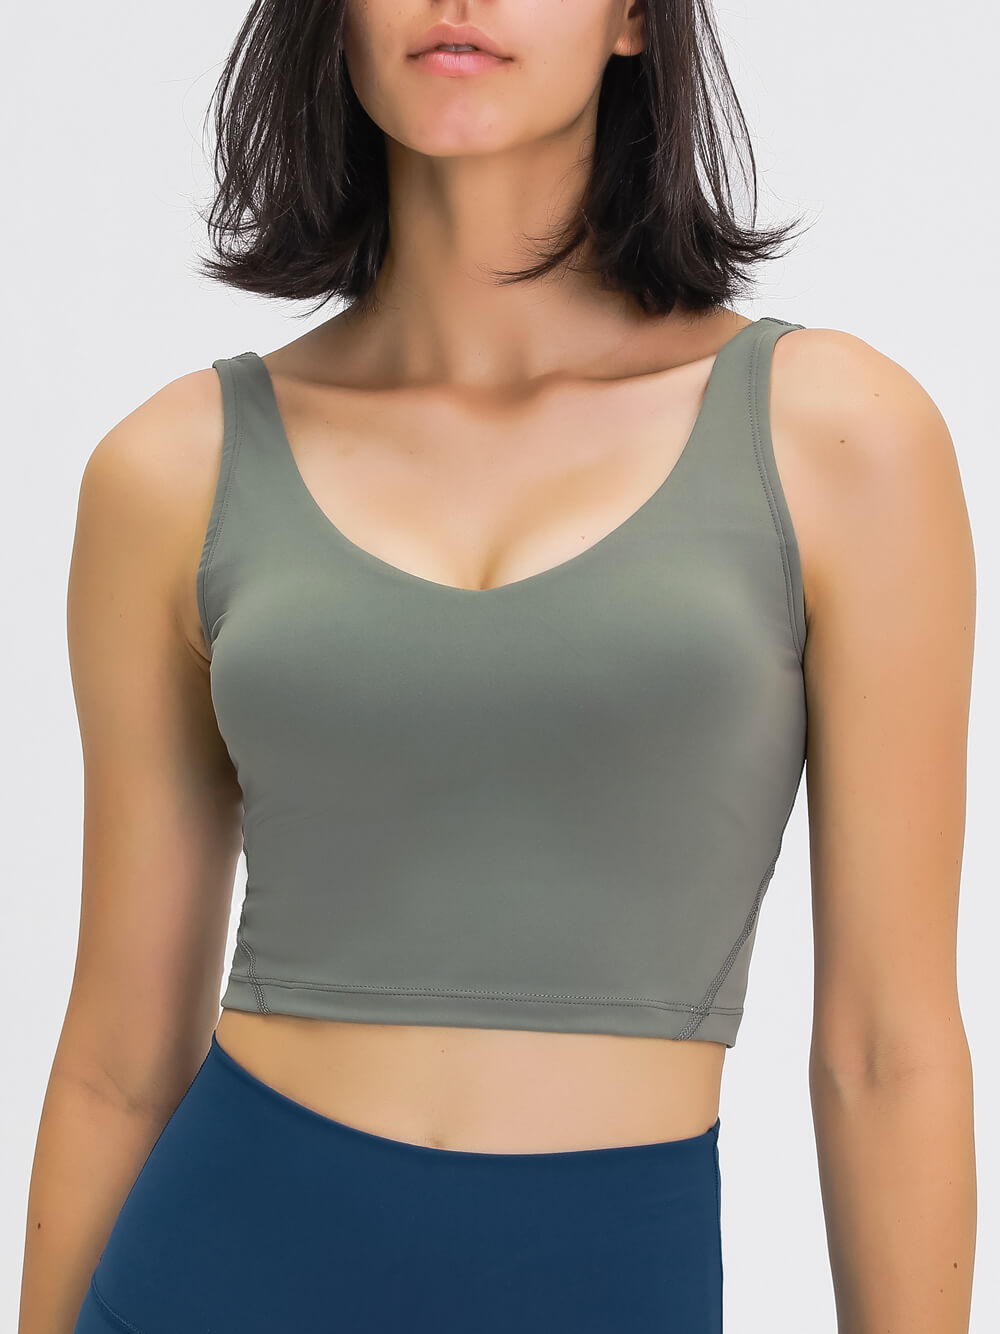 Nepoagym PASSION New Color Women Long Crop Tank Top with Built in